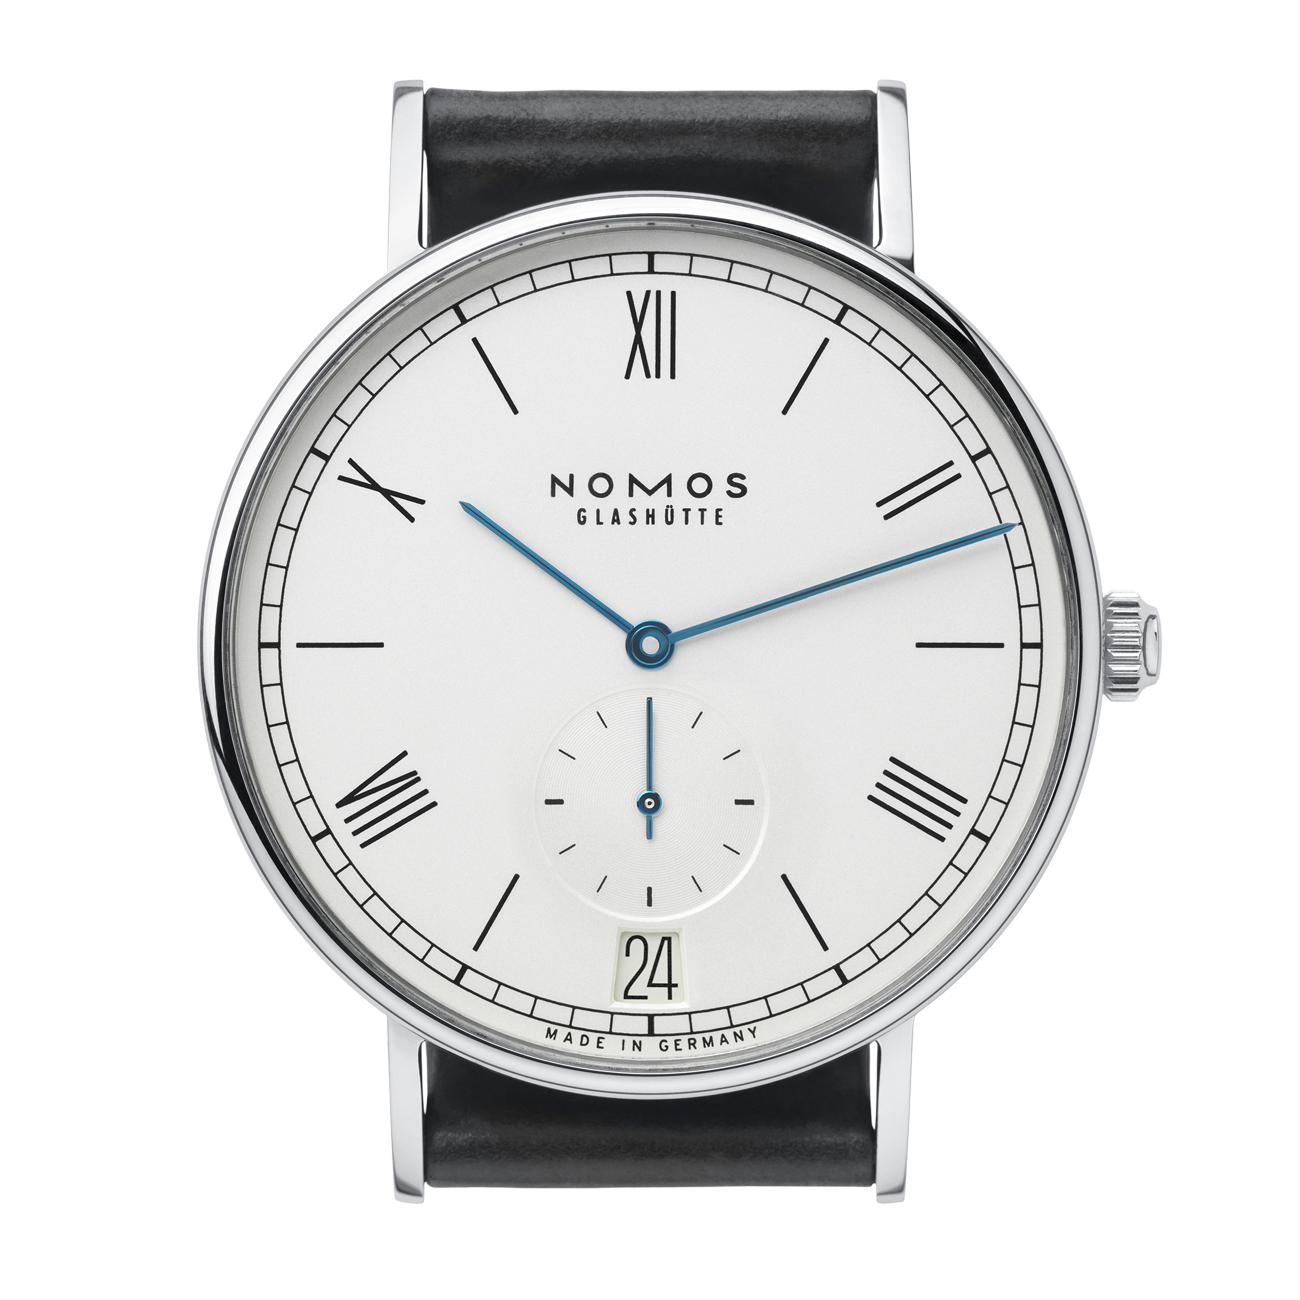 Watches and Wonders 2021: NOMOS Glashütte Metro Neomatik 41 Update, Or A  Compliment for Urbanism | Saatolog.com.tr